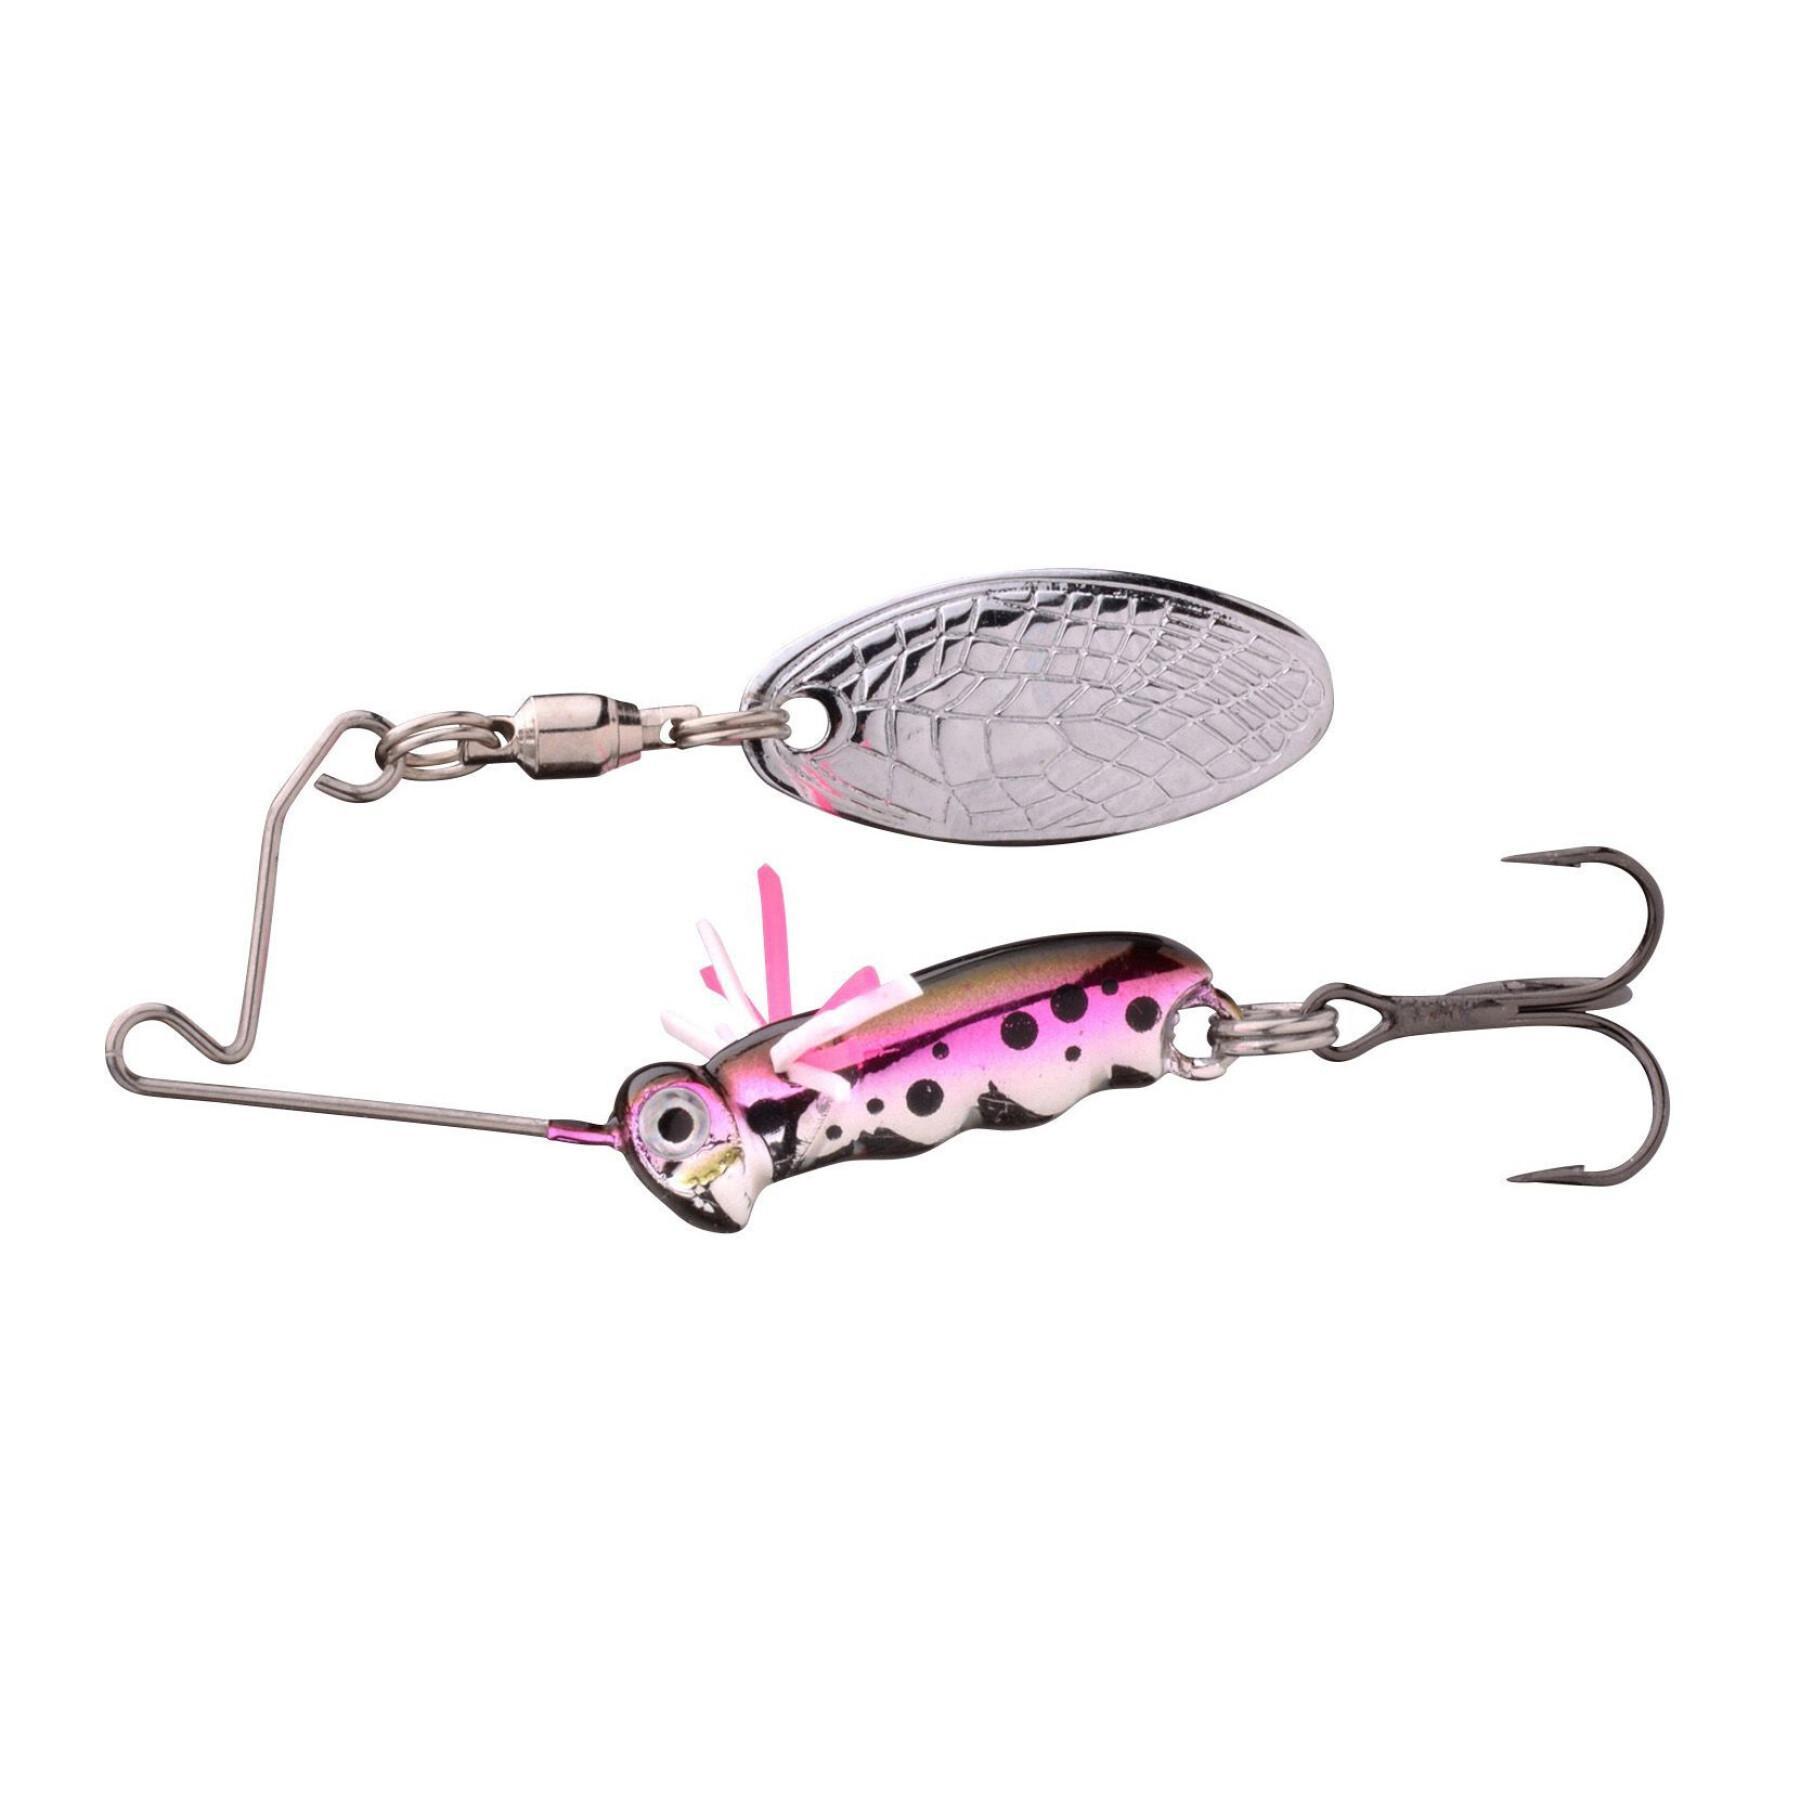 Lure Spro Larva Micro Spinnerbait - Other sports